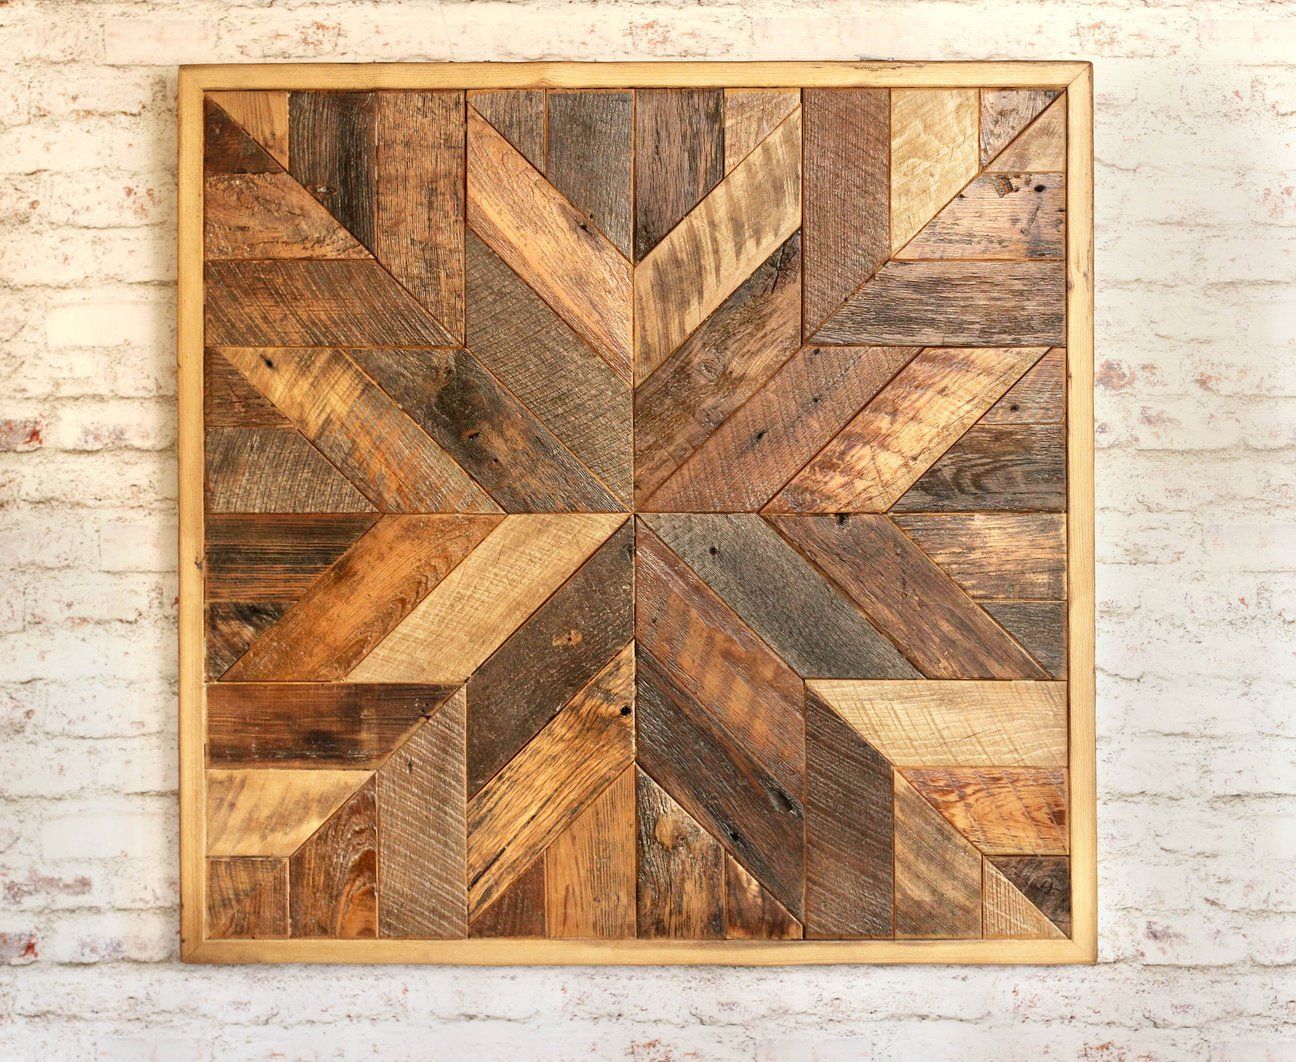 Reclaimed Wood Quilt Square (26 Inches) | Wooden Wall Decor, Reclaimed For Square Wall Art (View 4 of 15)